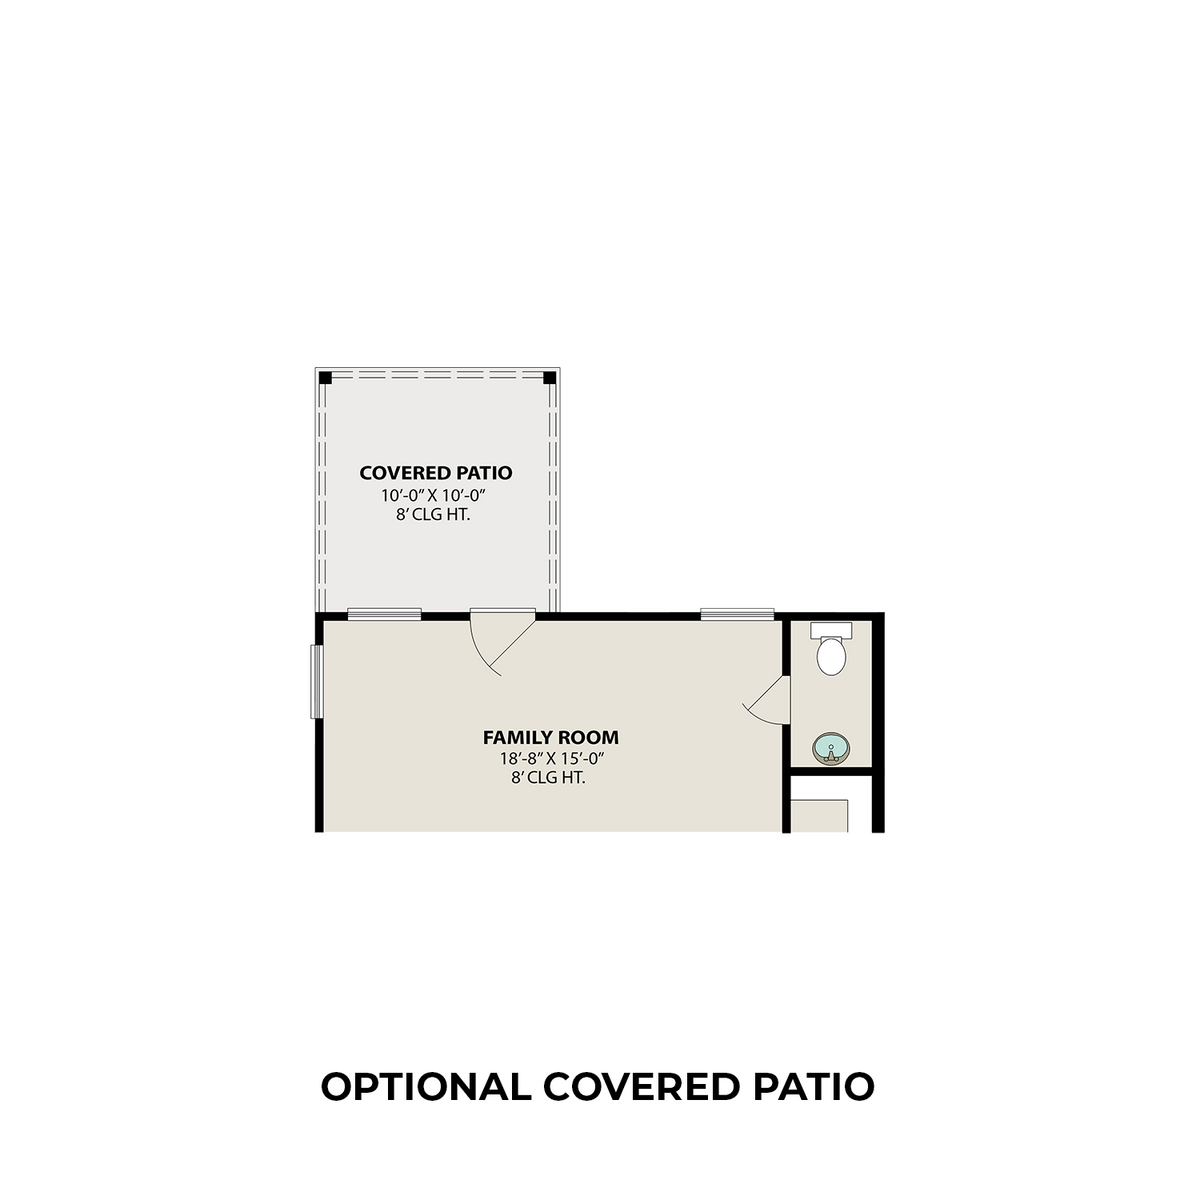 3 - The Lily B floor plan layout for 5235 Shallowhurst Lane in Davidson Homes' Haven at Kieth Harrow community.